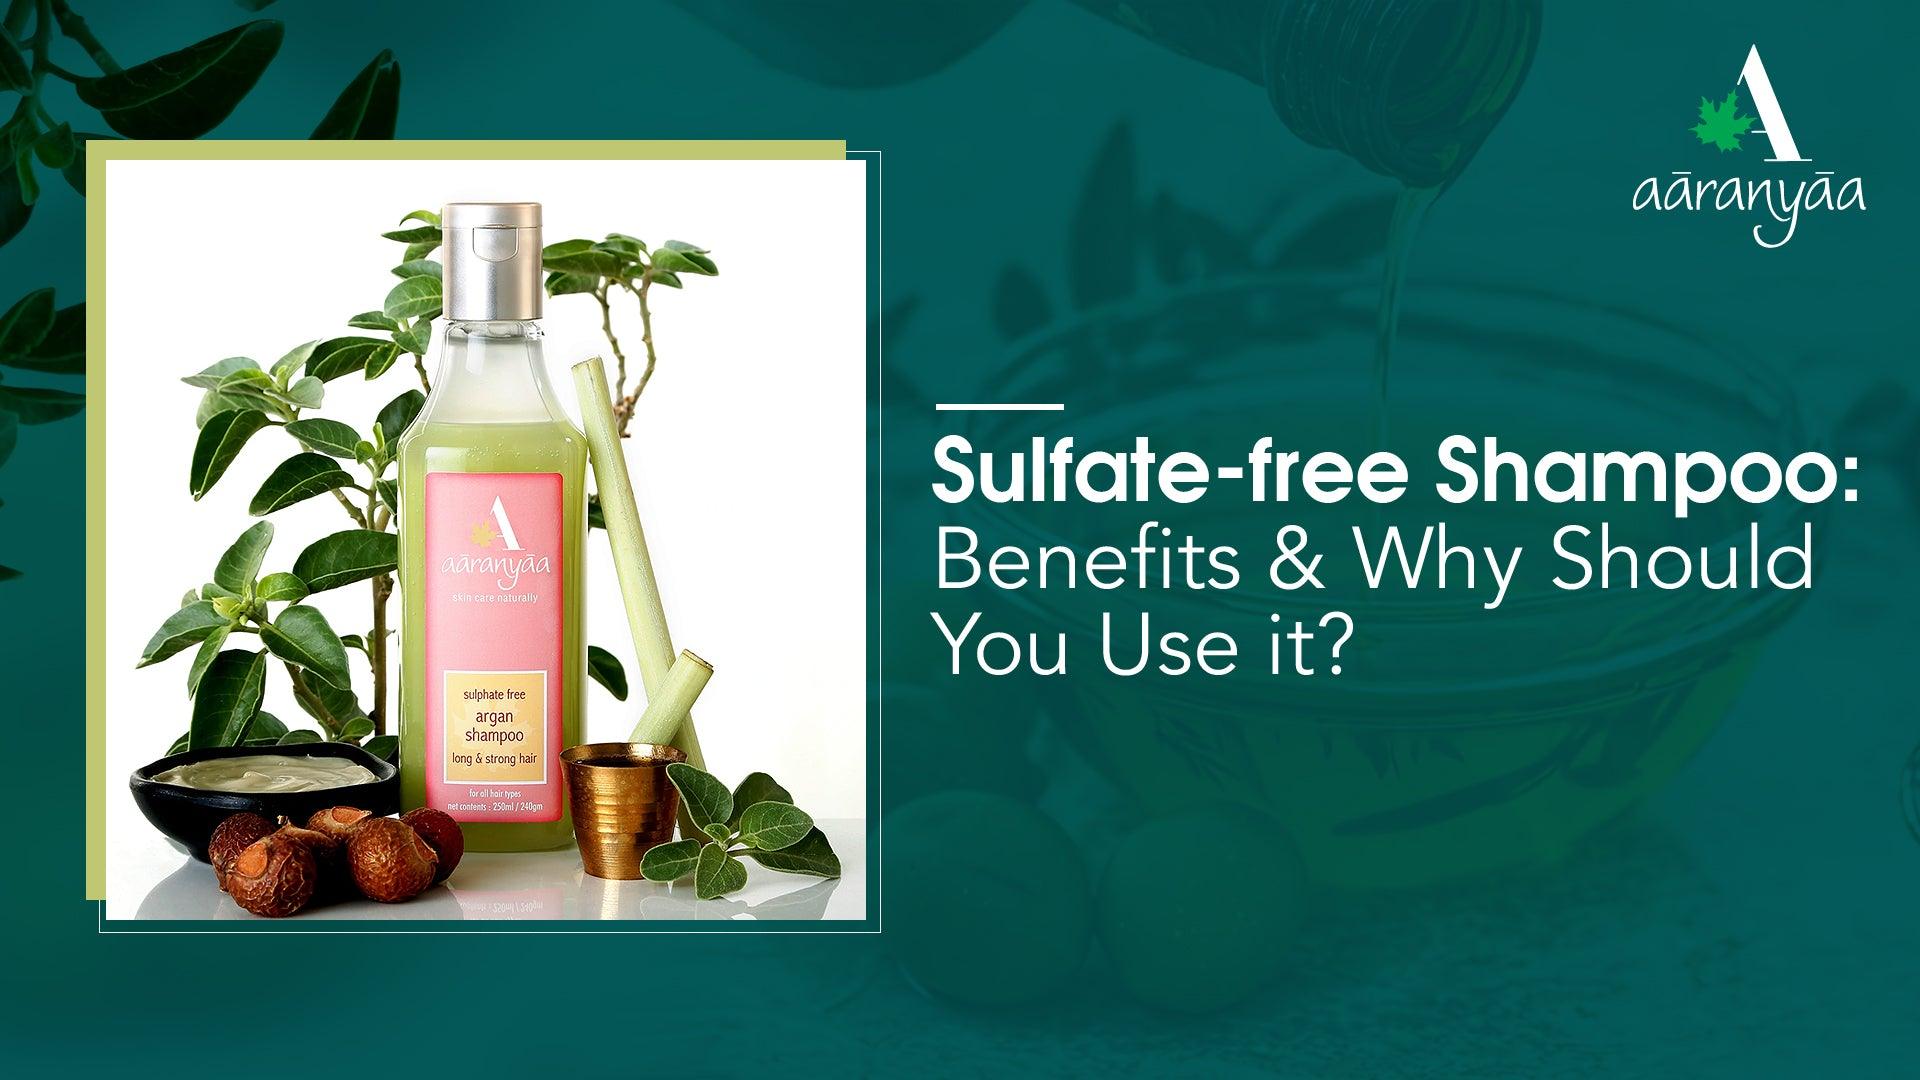 Everything You Need to Know About Switching to Sulfate-Free